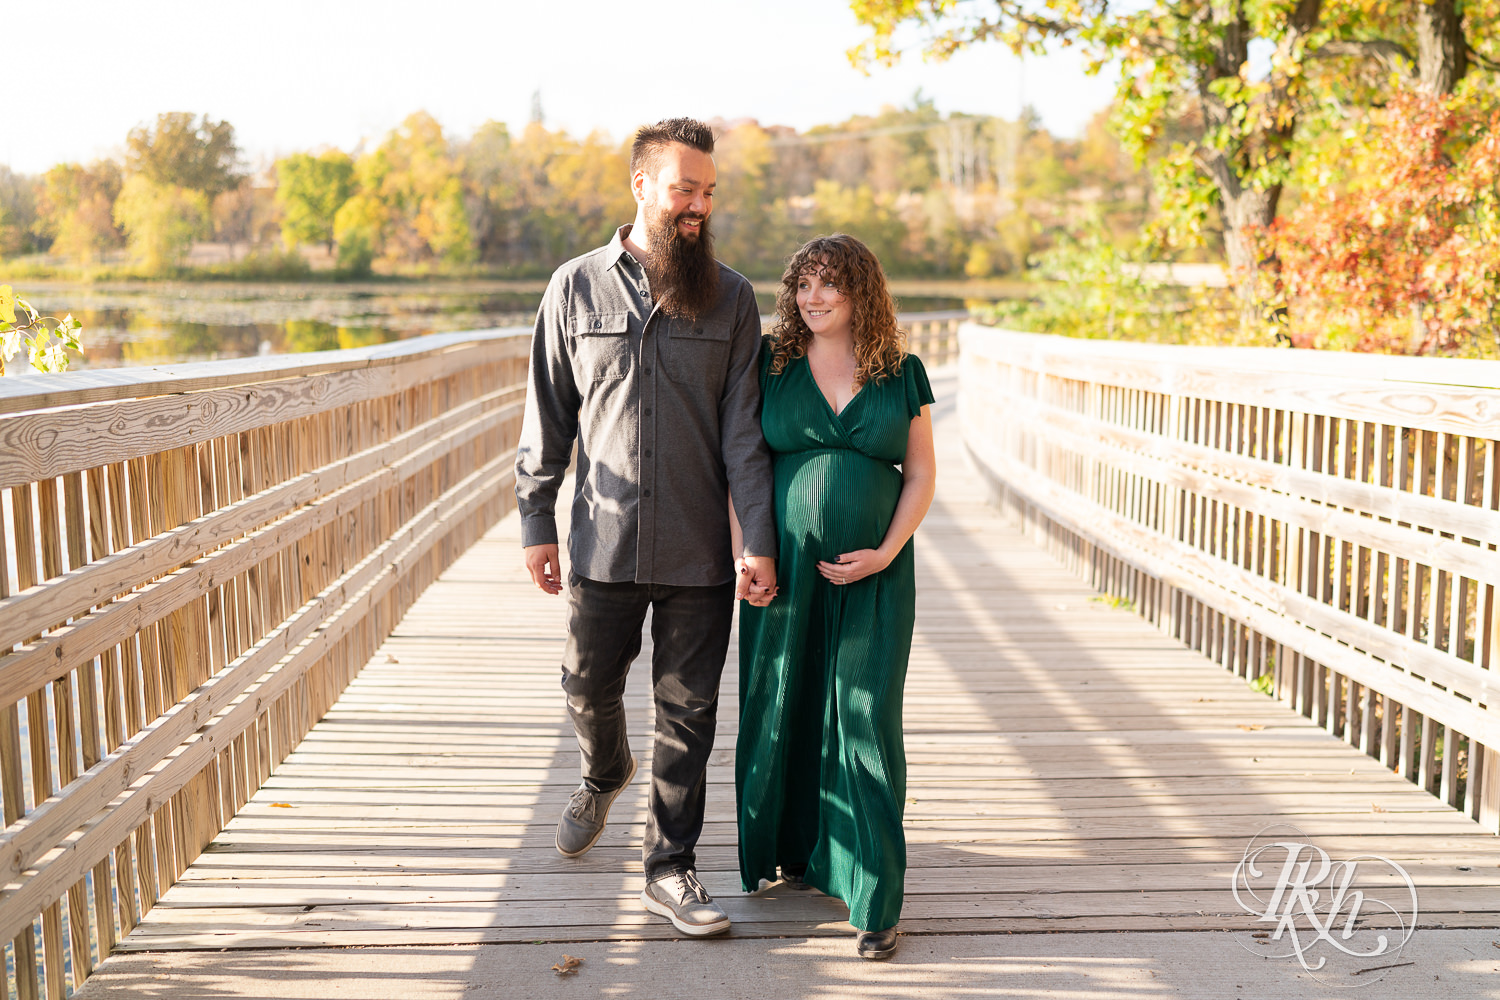 Pregnant woman in green dress and man hold belly and walk on bridge in Lebanon Hills Regional Park in Eagan, Minnesota.